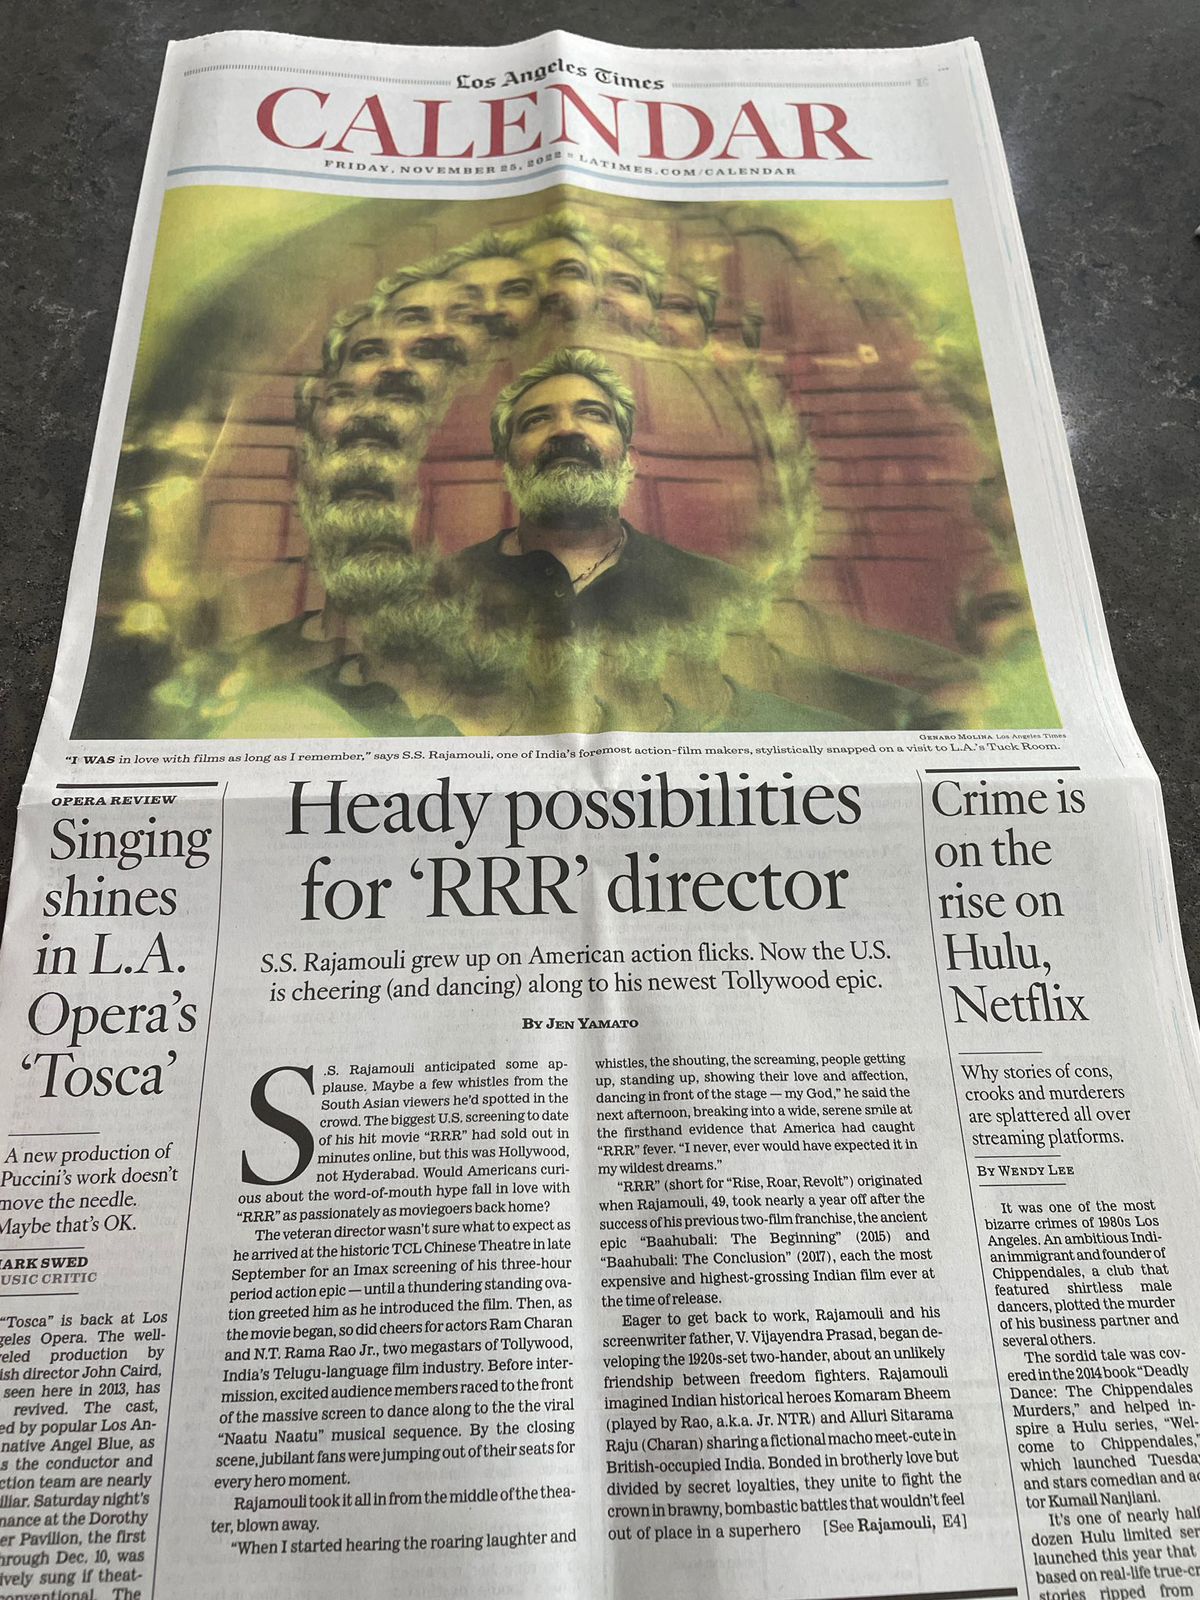 LA Times gives front page coverage to Rajamouli